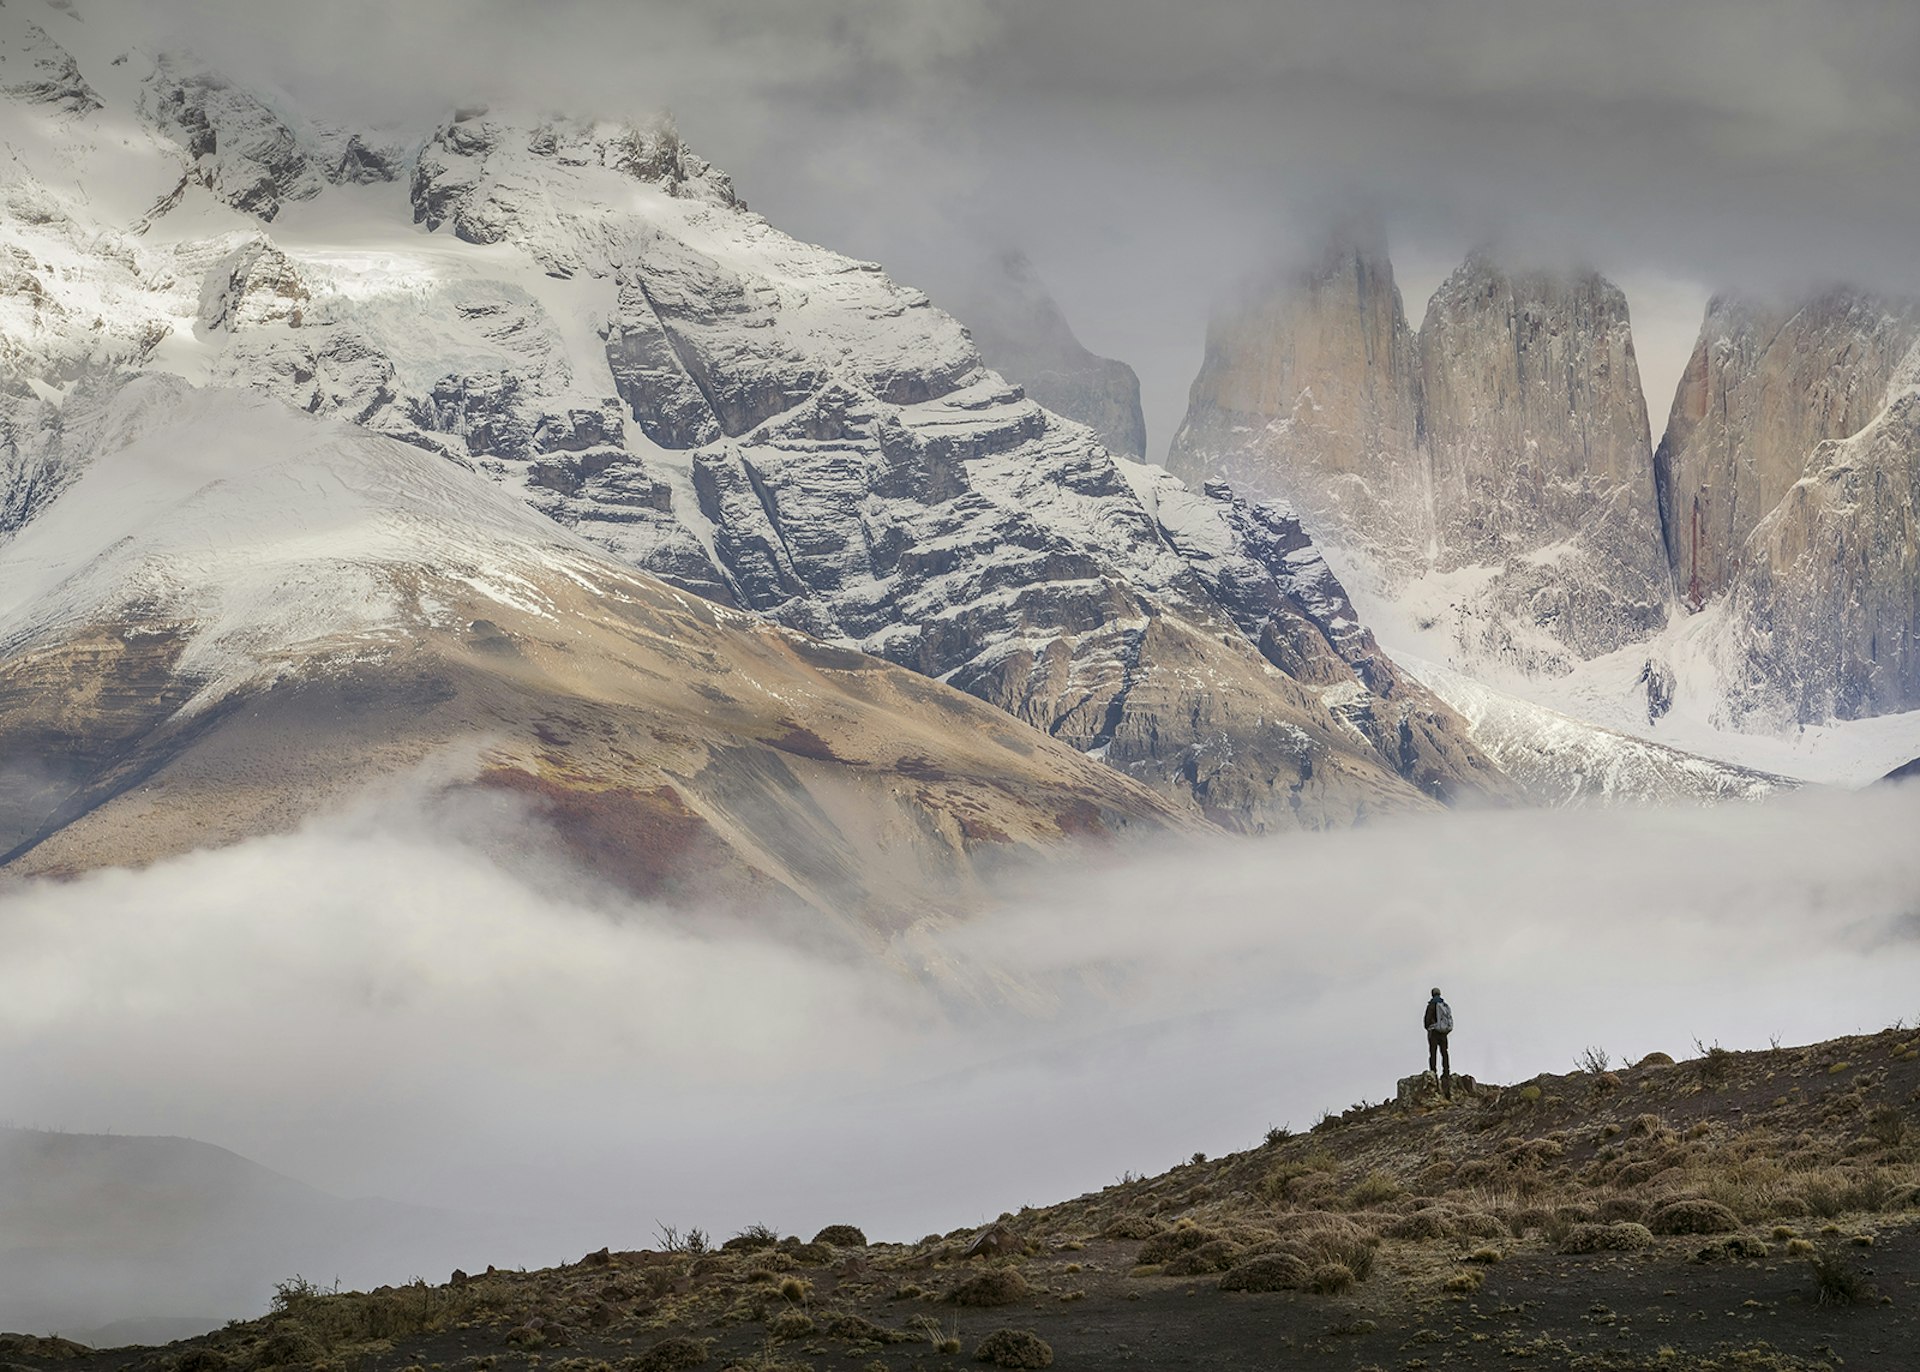 A hiker in front of the Torres del Paine mountain range, Chilean Patagonia © Philip Lee Harvey / Lonely Planet